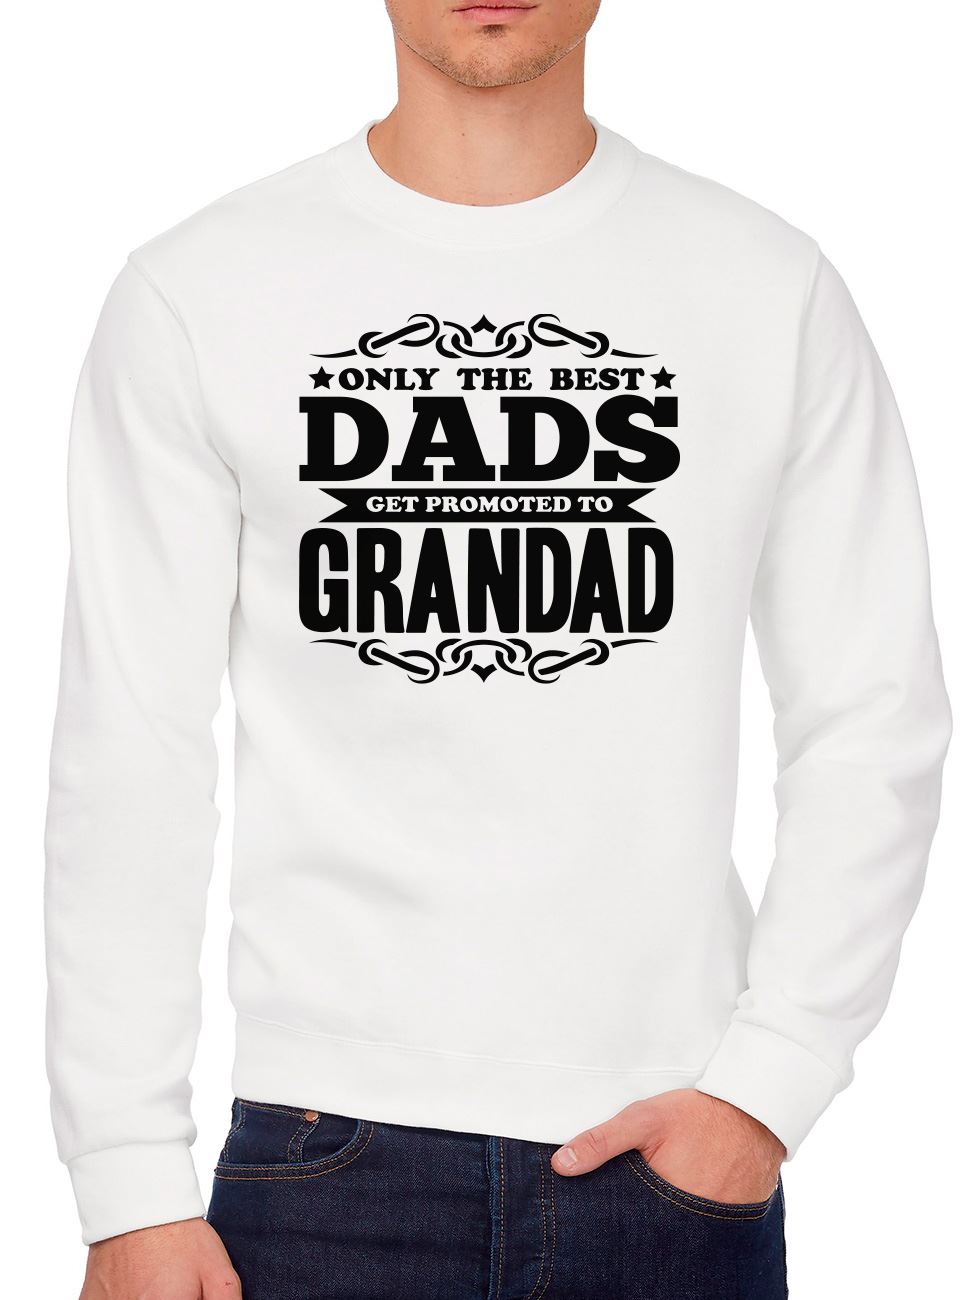 Only the Best Dads Get Promoted To Grandad - Youth & Mens Sweatshirt